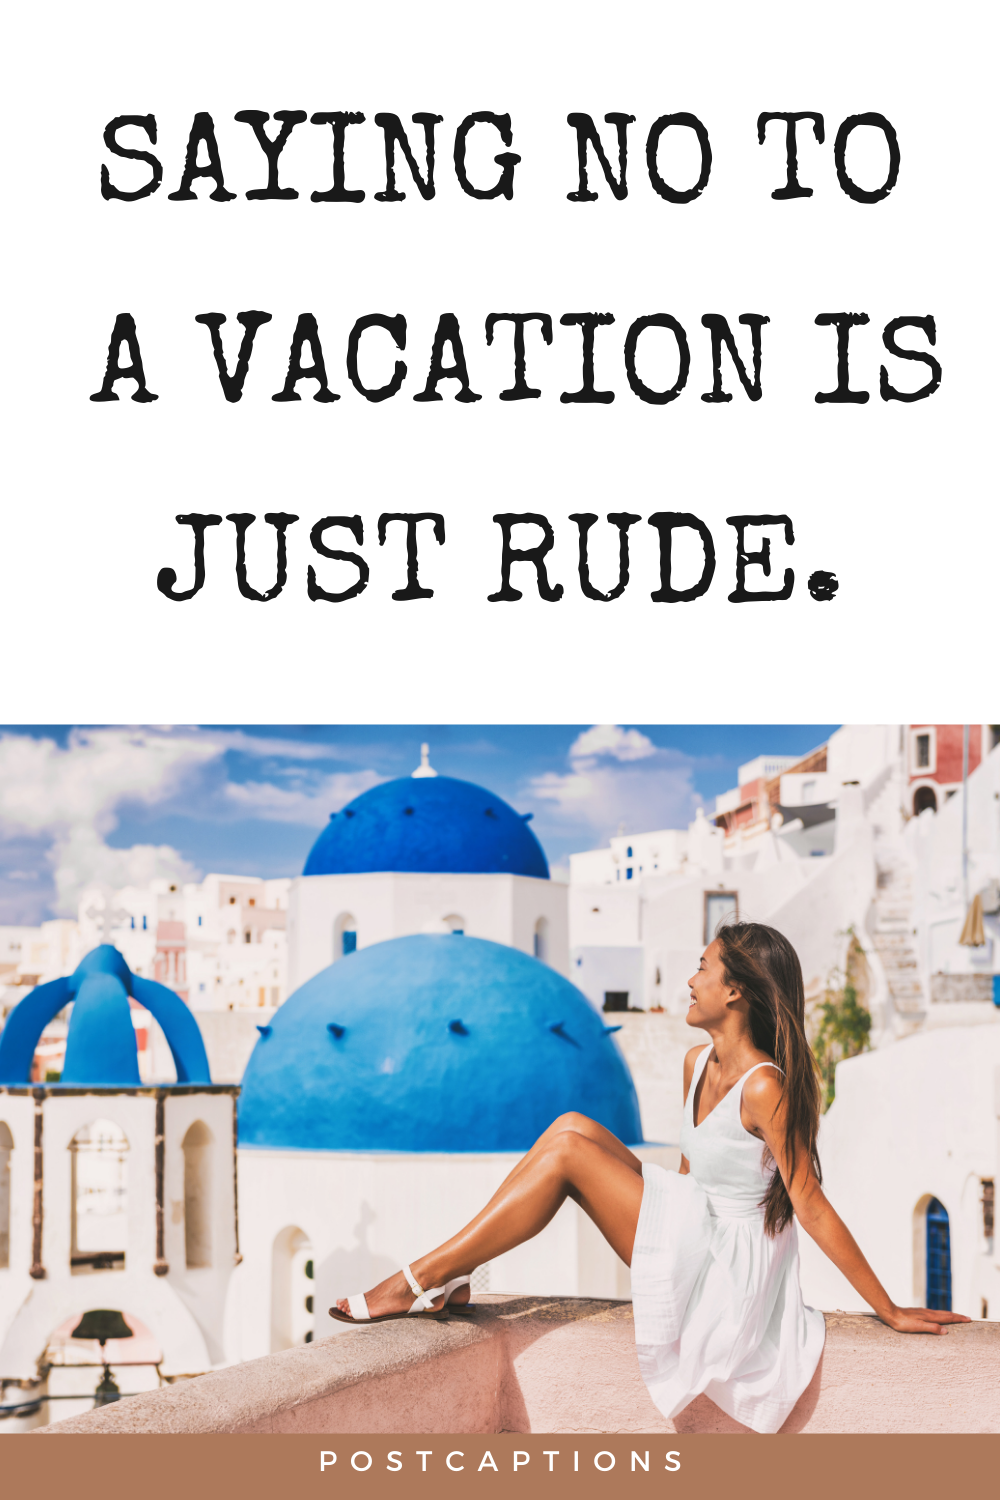 Funny Vacations captions